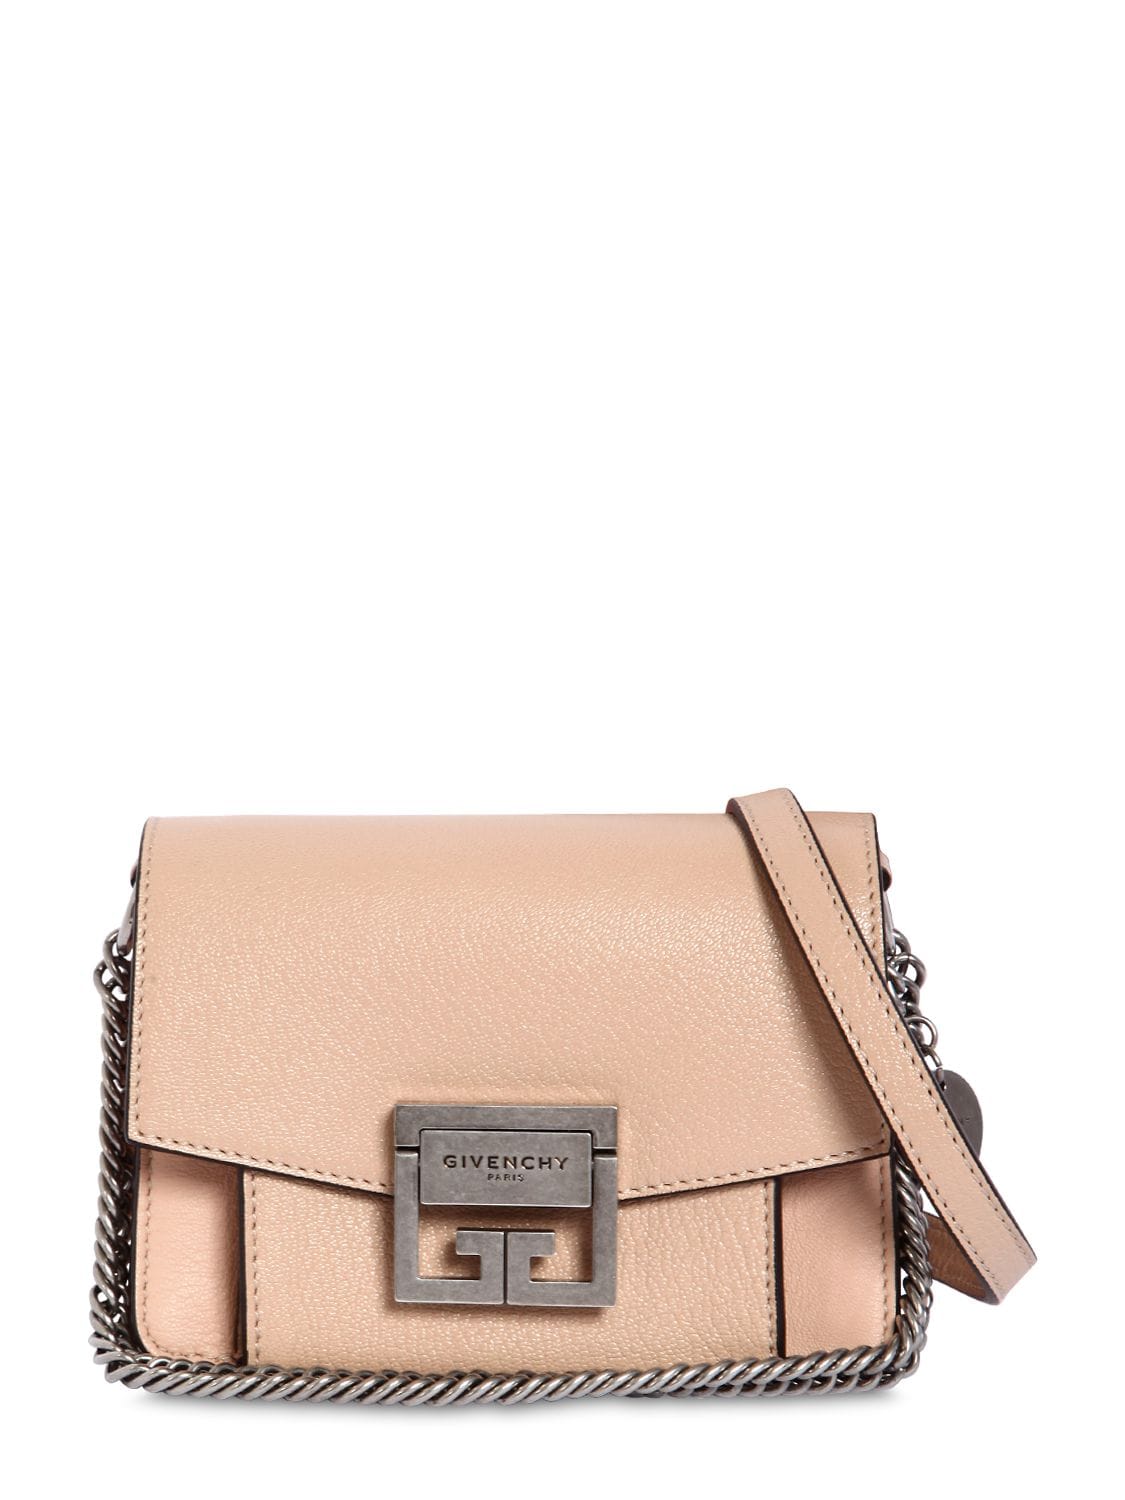 Givenchy Small Gv3 Grained Leather Shoulder Bag In Nude